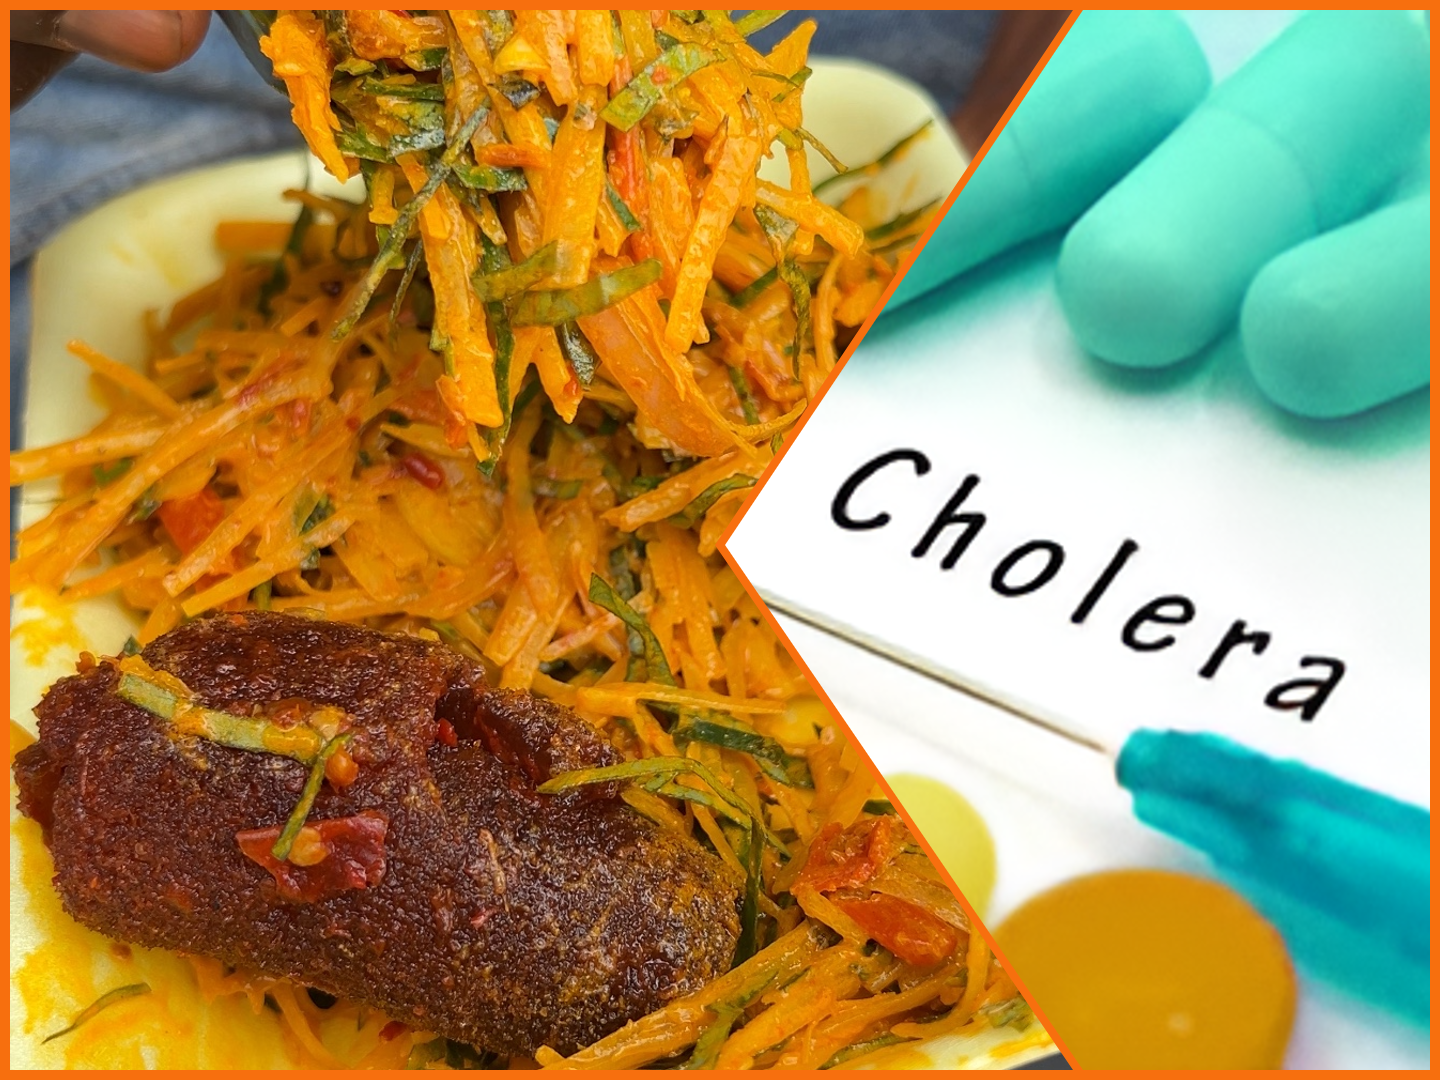 The cause of the latest cholera outbreak in Nigeria has been attributed to street foods. 